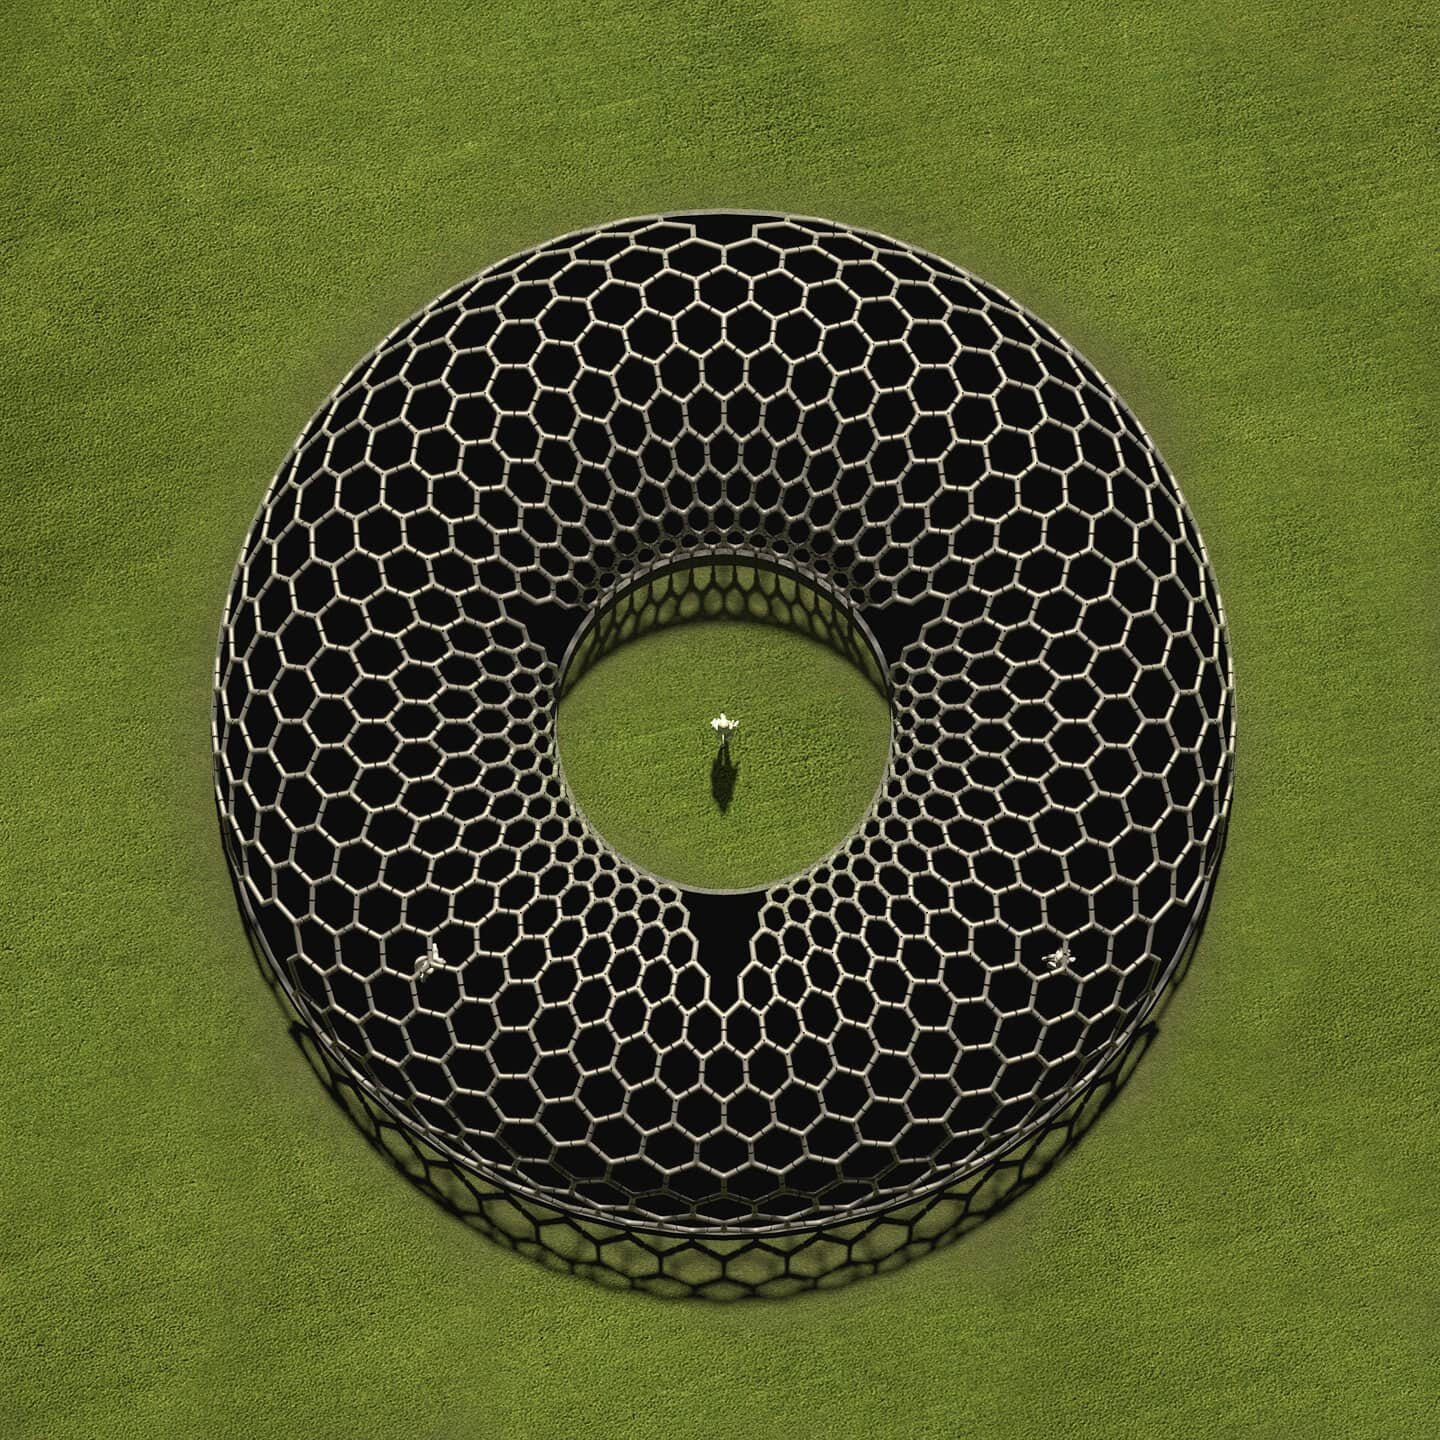 Aerial view of a proposal for an art pavilion designed to scale up a patented jewellery component designed by @atelierhg
*
The pavilion embraces the donut-like form of the #torus which is considered a sacred geometry as it expresses the electromagnet